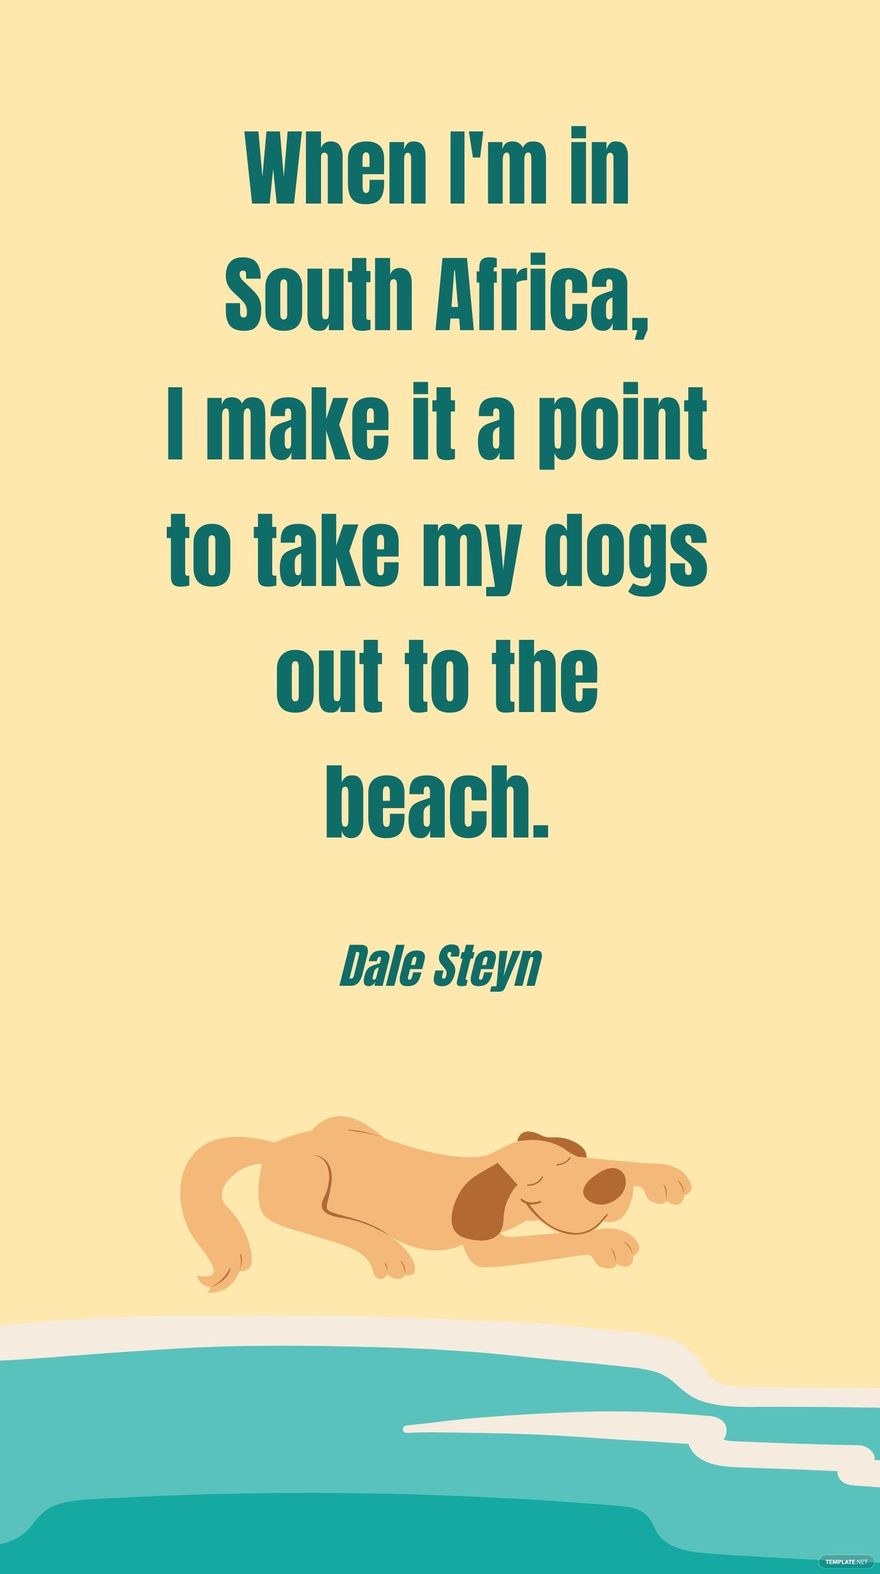 Free Dale Steyn - When I'm in South Africa, I make it a point to take my dogs out to the beach. in JPG